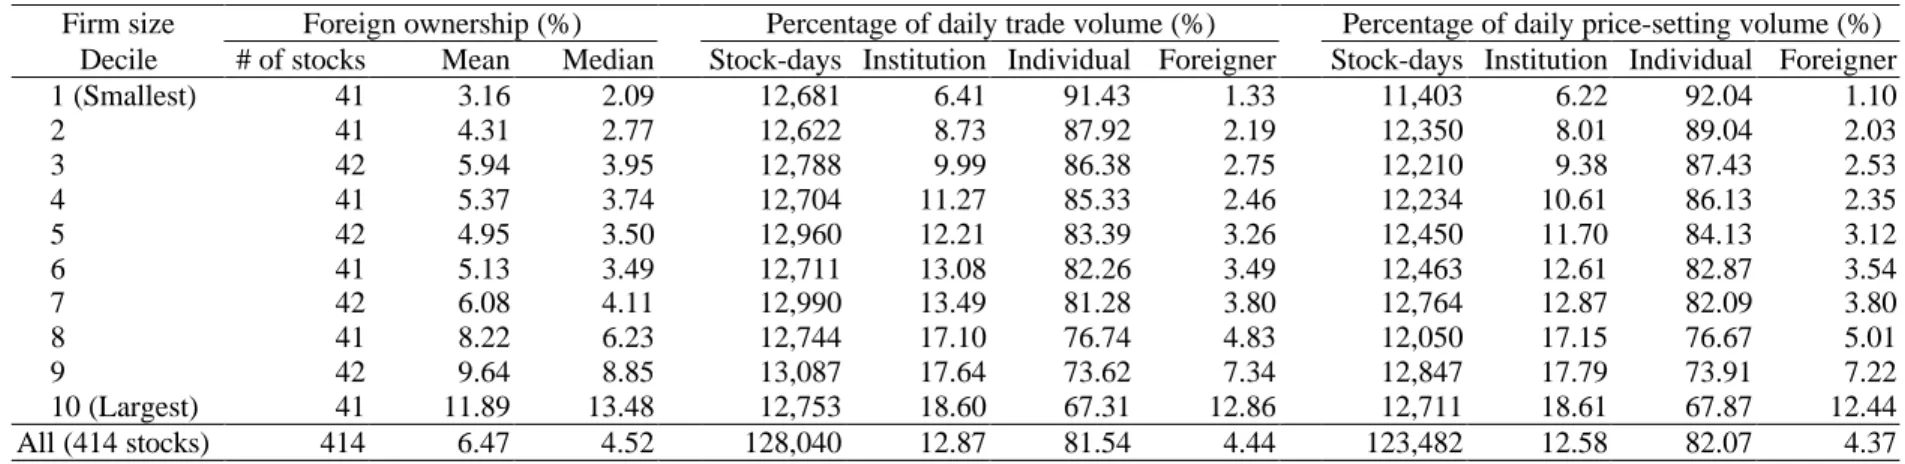 Table 1. Foreign ownership, and percentage of daily trade volume and price-setting trade volume for three types of investors at the KSE from Dec